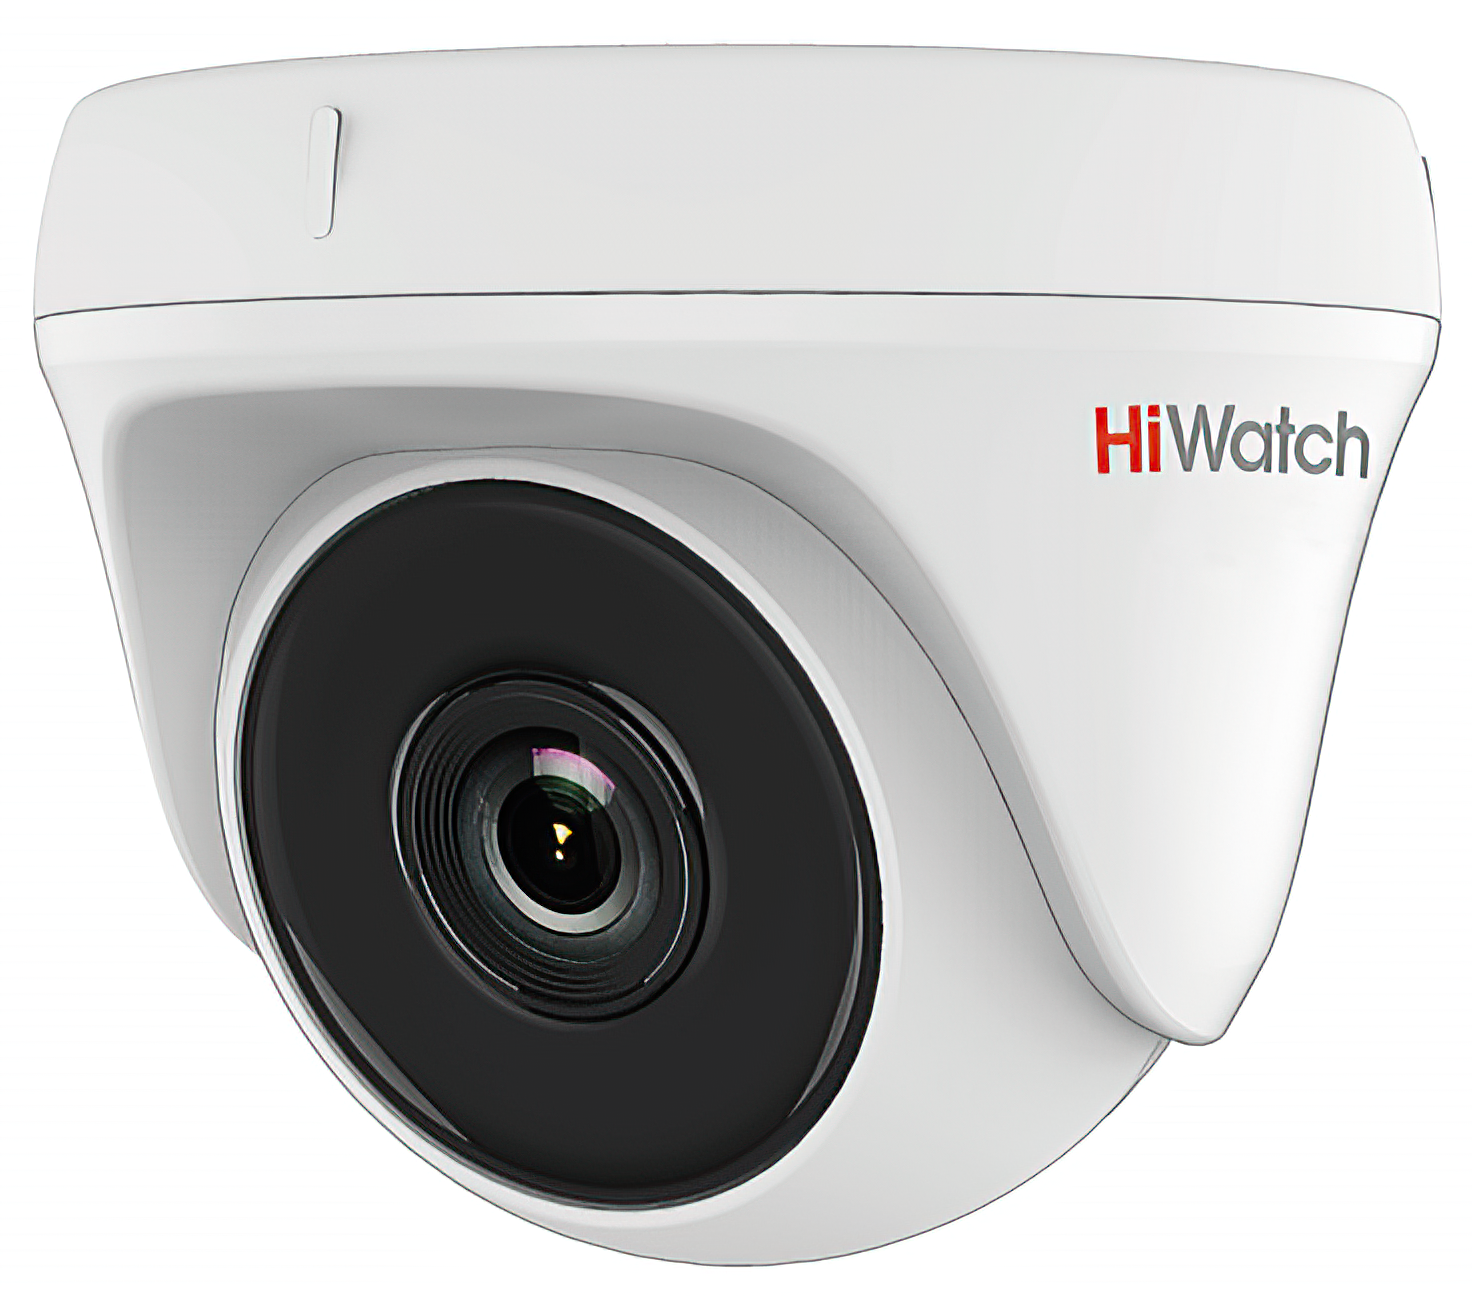   HiWatch DS-T233 (2.8 )